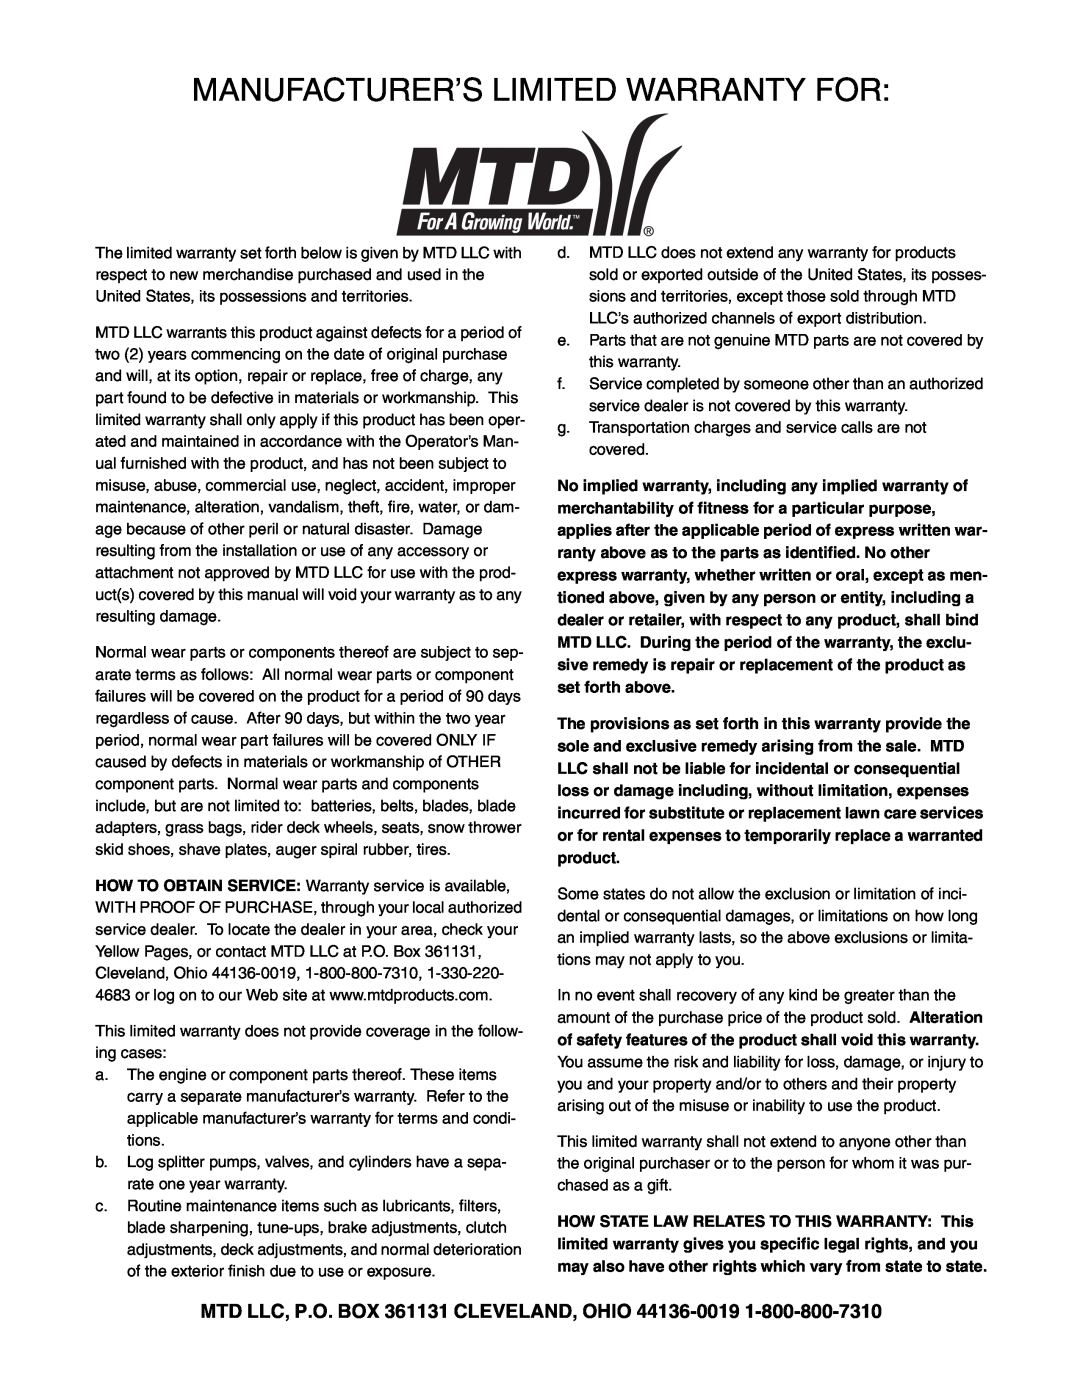 MTD Lawn Tracto manual Manufacturer’S Limited Warranty For 